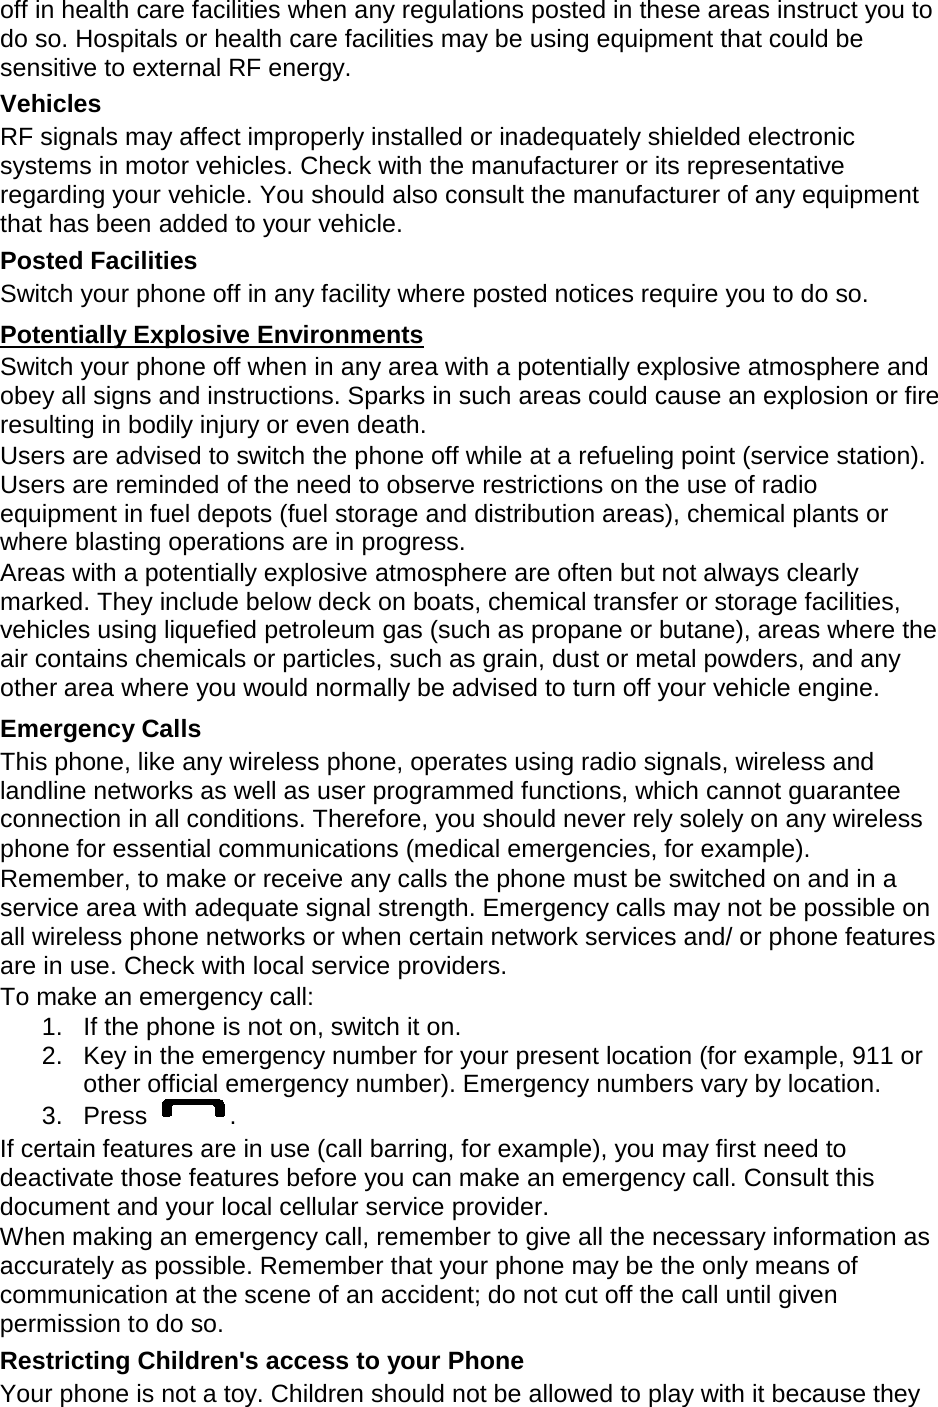 off in health care facilities when any regulations posted in these areas instruct you to do so. Hospitals or health care facilities may be using equipment that could be sensitive to external RF energy. Vehicles RF signals may affect improperly installed or inadequately shielded electronic systems in motor vehicles. Check with the manufacturer or its representative regarding your vehicle. You should also consult the manufacturer of any equipment that has been added to your vehicle. Posted Facilities Switch your phone off in any facility where posted notices require you to do so. Potentially Explosive Environments Switch your phone off when in any area with a potentially explosive atmosphere and obey all signs and instructions. Sparks in such areas could cause an explosion or fire resulting in bodily injury or even death. Users are advised to switch the phone off while at a refueling point (service station). Users are reminded of the need to observe restrictions on the use of radio equipment in fuel depots (fuel storage and distribution areas), chemical plants or where blasting operations are in progress. Areas with a potentially explosive atmosphere are often but not always clearly marked. They include below deck on boats, chemical transfer or storage facilities, vehicles using liquefied petroleum gas (such as propane or butane), areas where the air contains chemicals or particles, such as grain, dust or metal powders, and any other area where you would normally be advised to turn off your vehicle engine. Emergency Calls This phone, like any wireless phone, operates using radio signals, wireless and landline networks as well as user programmed functions, which cannot guarantee connection in all conditions. Therefore, you should never rely solely on any wireless phone for essential communications (medical emergencies, for example). Remember, to make or receive any calls the phone must be switched on and in a service area with adequate signal strength. Emergency calls may not be possible on all wireless phone networks or when certain network services and/ or phone features are in use. Check with local service providers. To make an emergency call: 1. If the phone is not on, switch it on. 2. Key in the emergency number for your present location (for example, 911 or other official emergency number). Emergency numbers vary by location. 3.  Press  . If certain features are in use (call barring, for example), you may first need to deactivate those features before you can make an emergency call. Consult this document and your local cellular service provider. When making an emergency call, remember to give all the necessary information as accurately as possible. Remember that your phone may be the only means of communication at the scene of an accident; do not cut off the call until given permission to do so. Restricting Children&apos;s access to your Phone Your phone is not a toy. Children should not be allowed to play with it because they 